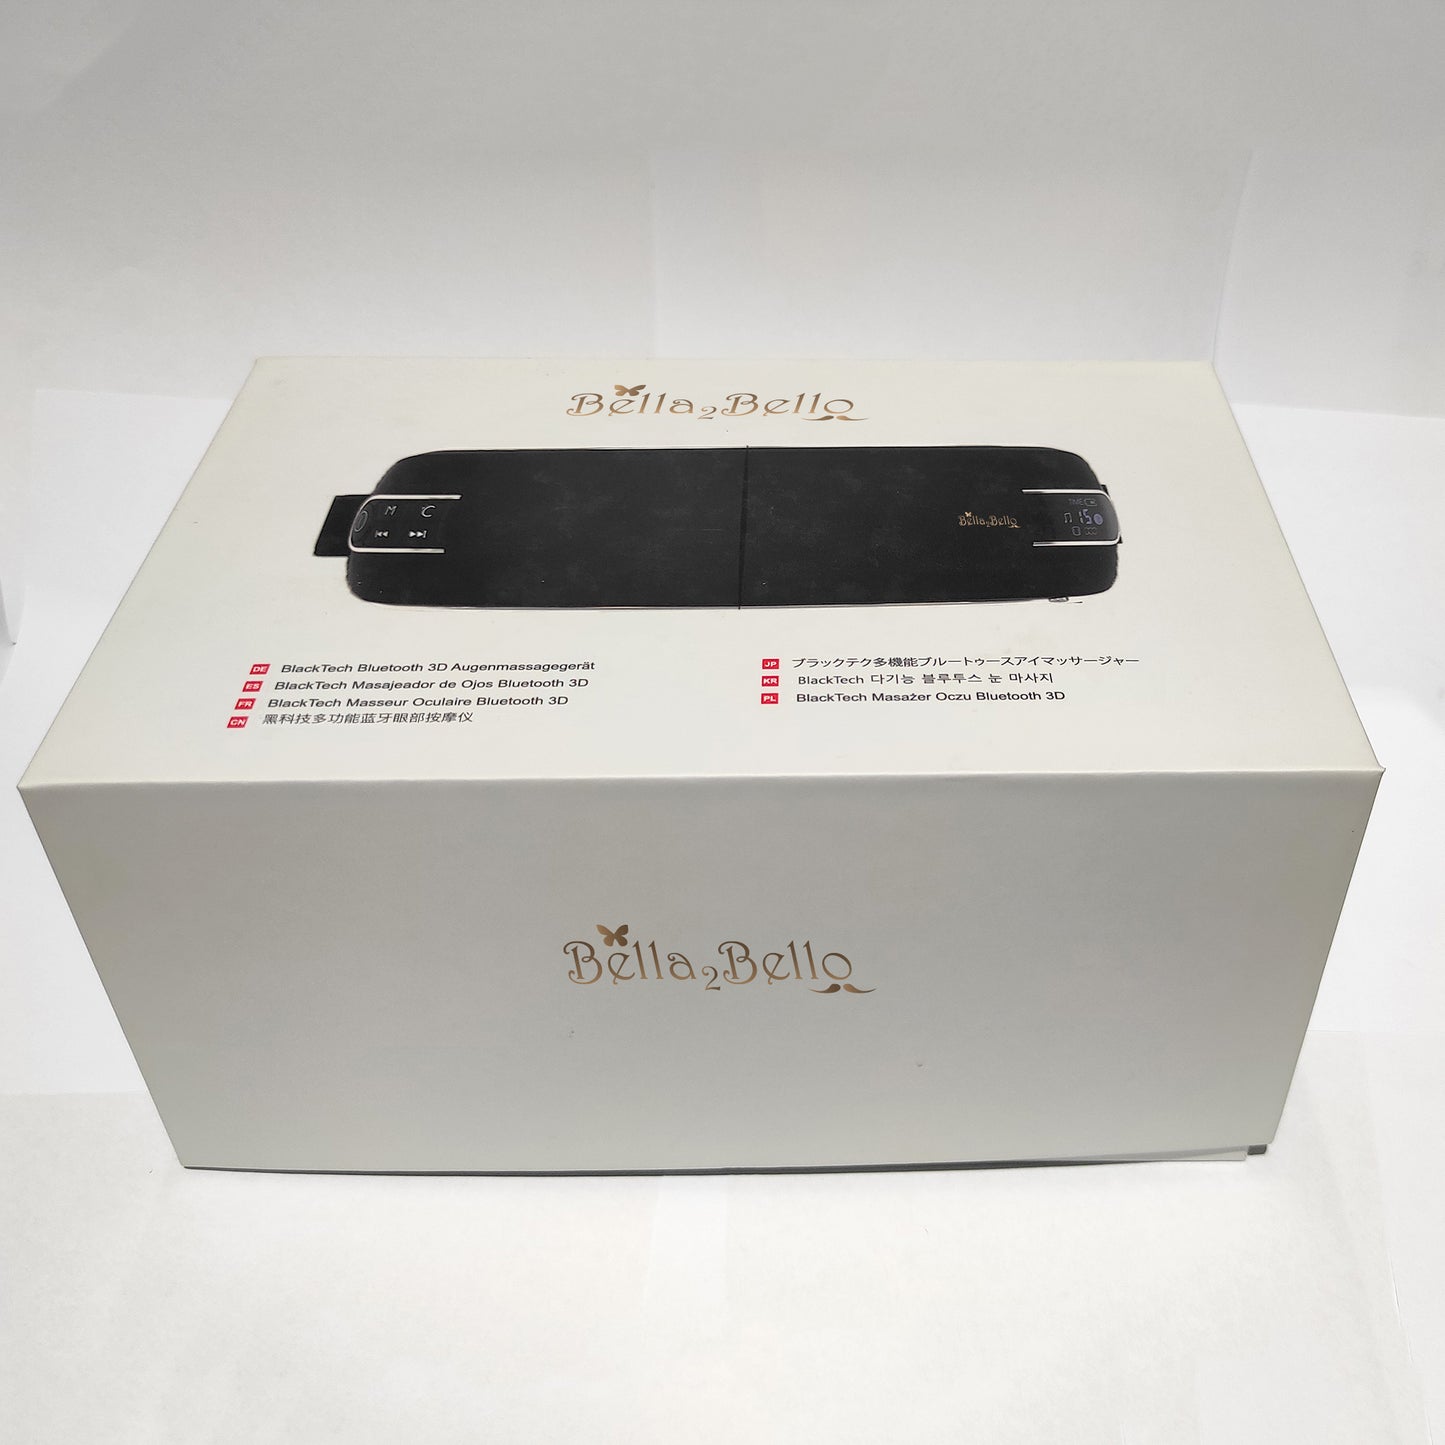 Bella2Bello's Electric Bluetooth 3D Air Compression Vibration Eye Massager with Heating System